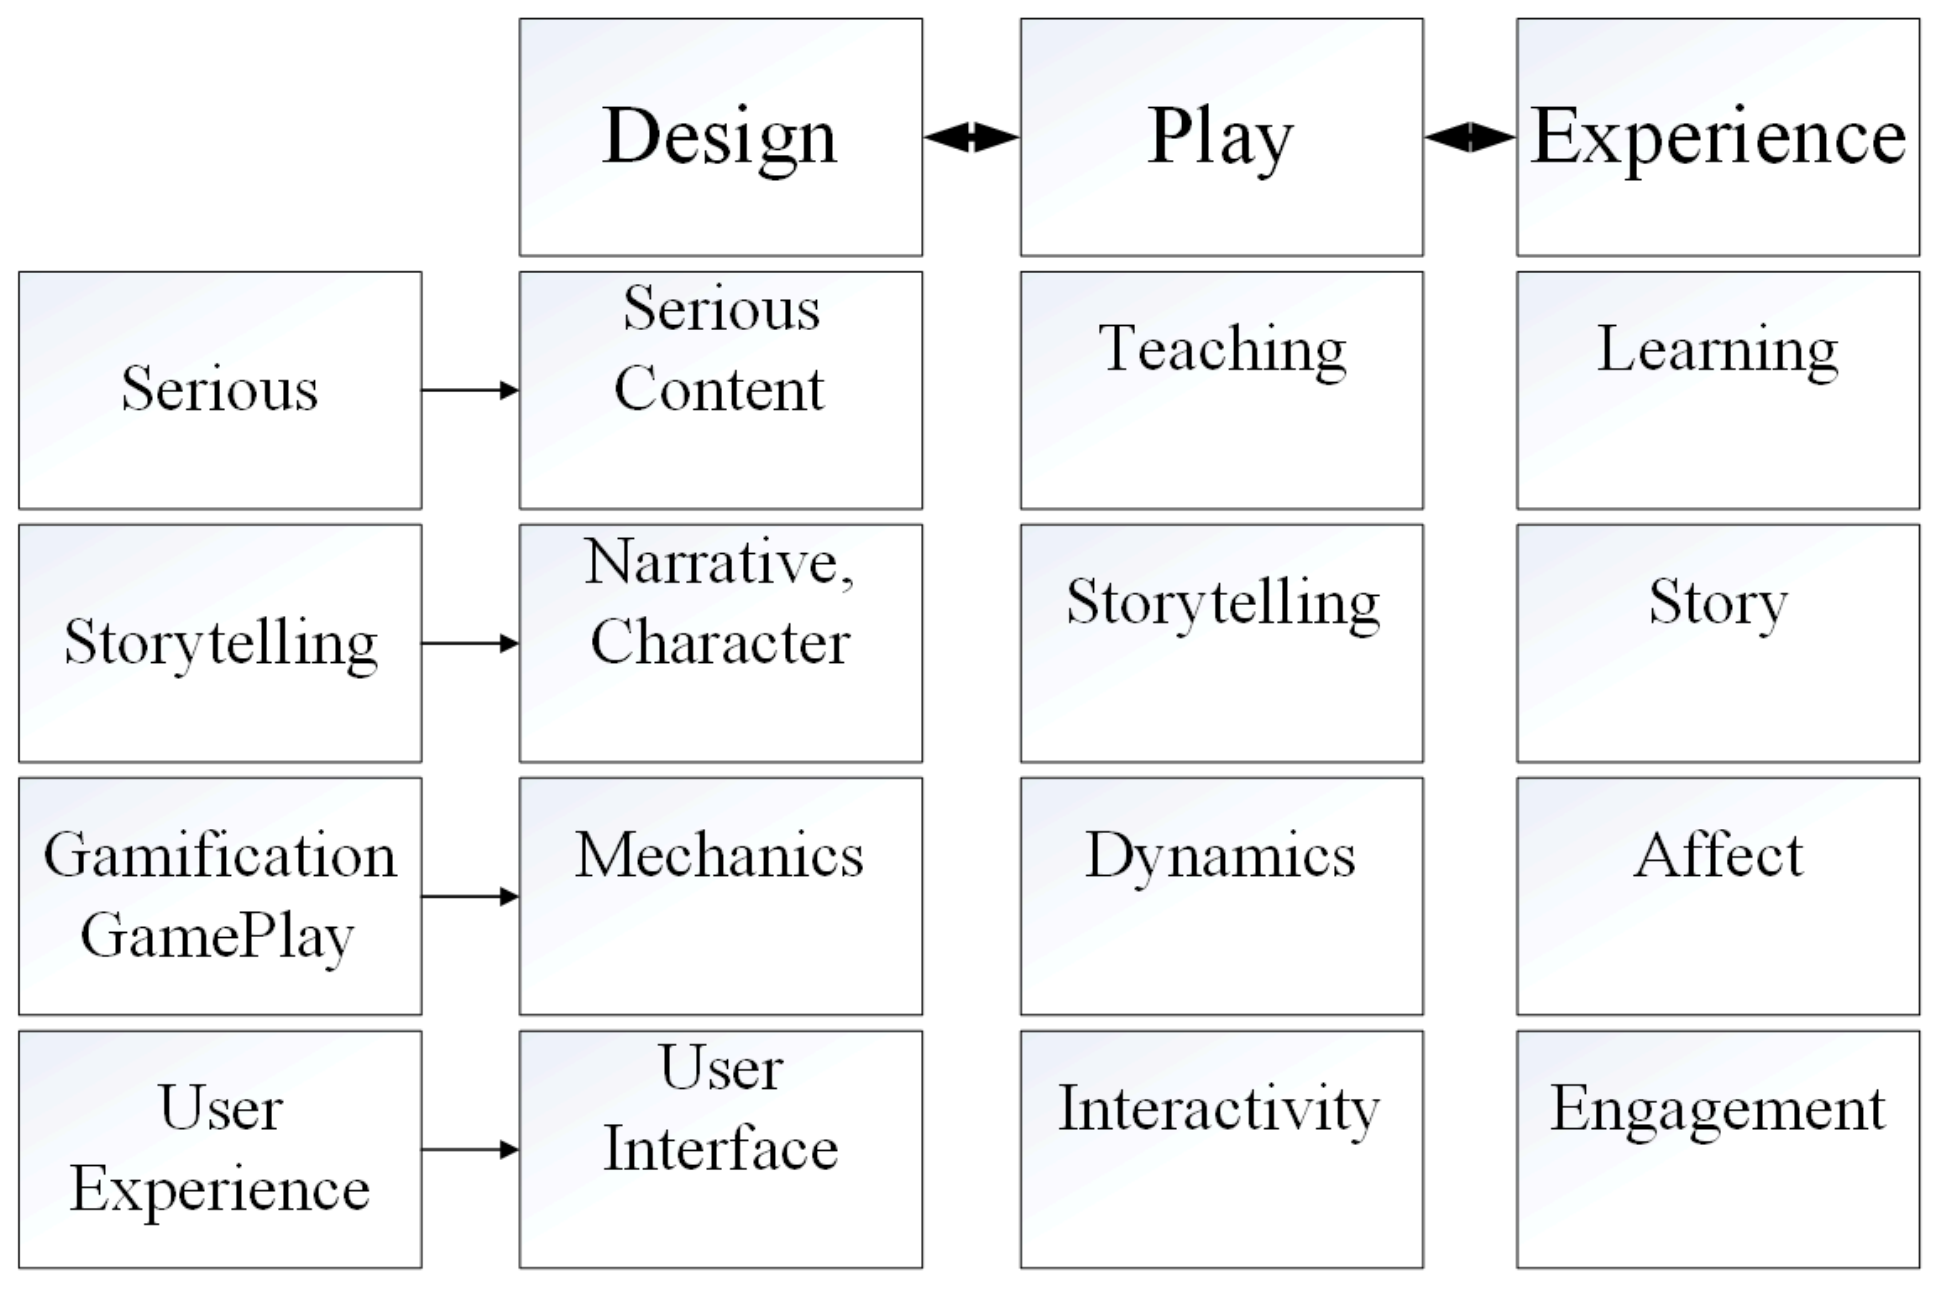 PDF] Purposeful by design?: a serious game design assessment